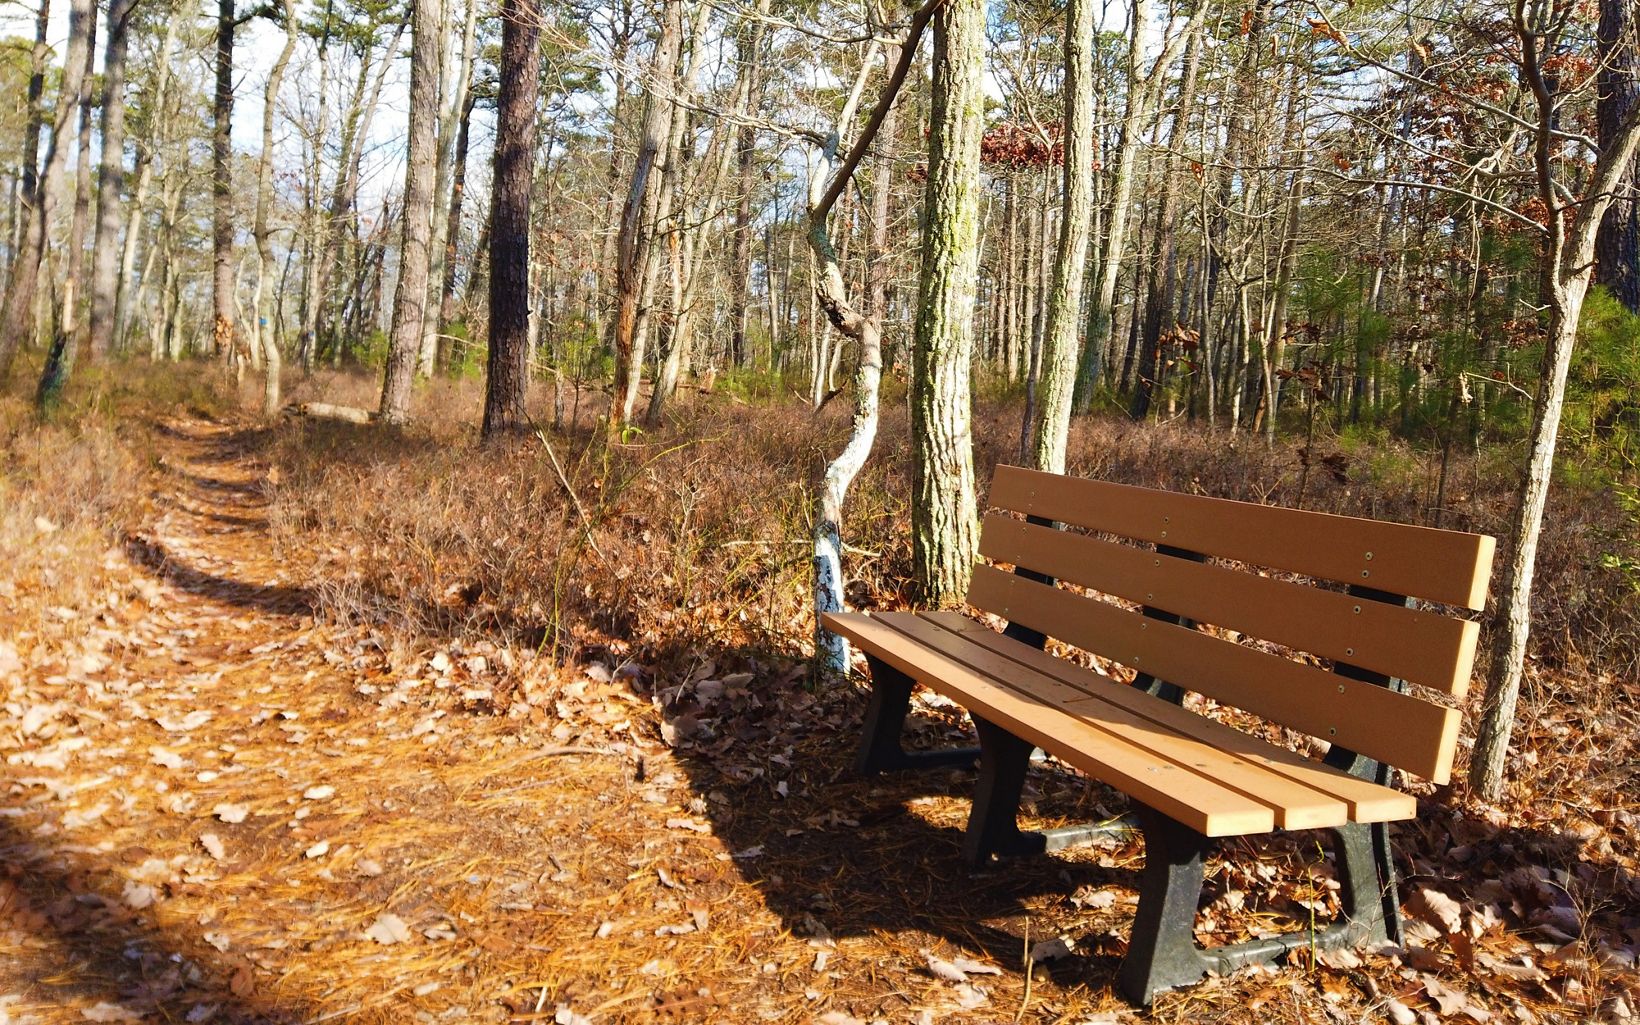 A bench along a trail through the woods.